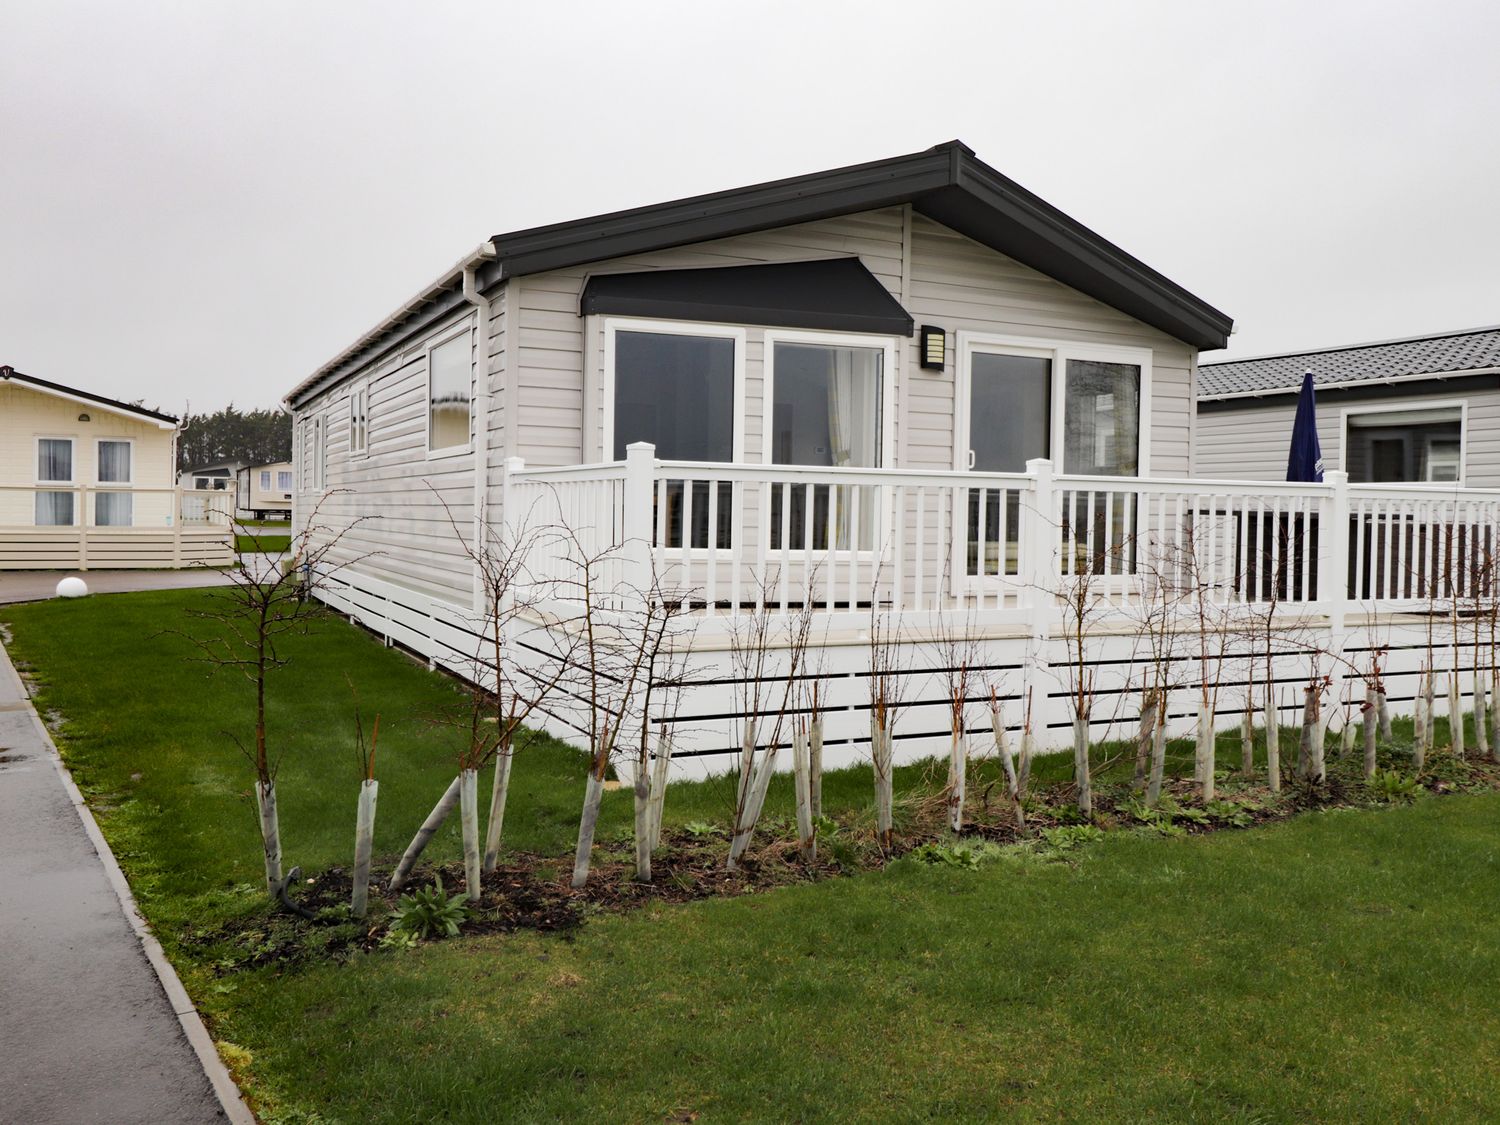 2 bedroom Lodge at Pevensey Bay - Kent & Sussex - 1043960 - photo 1